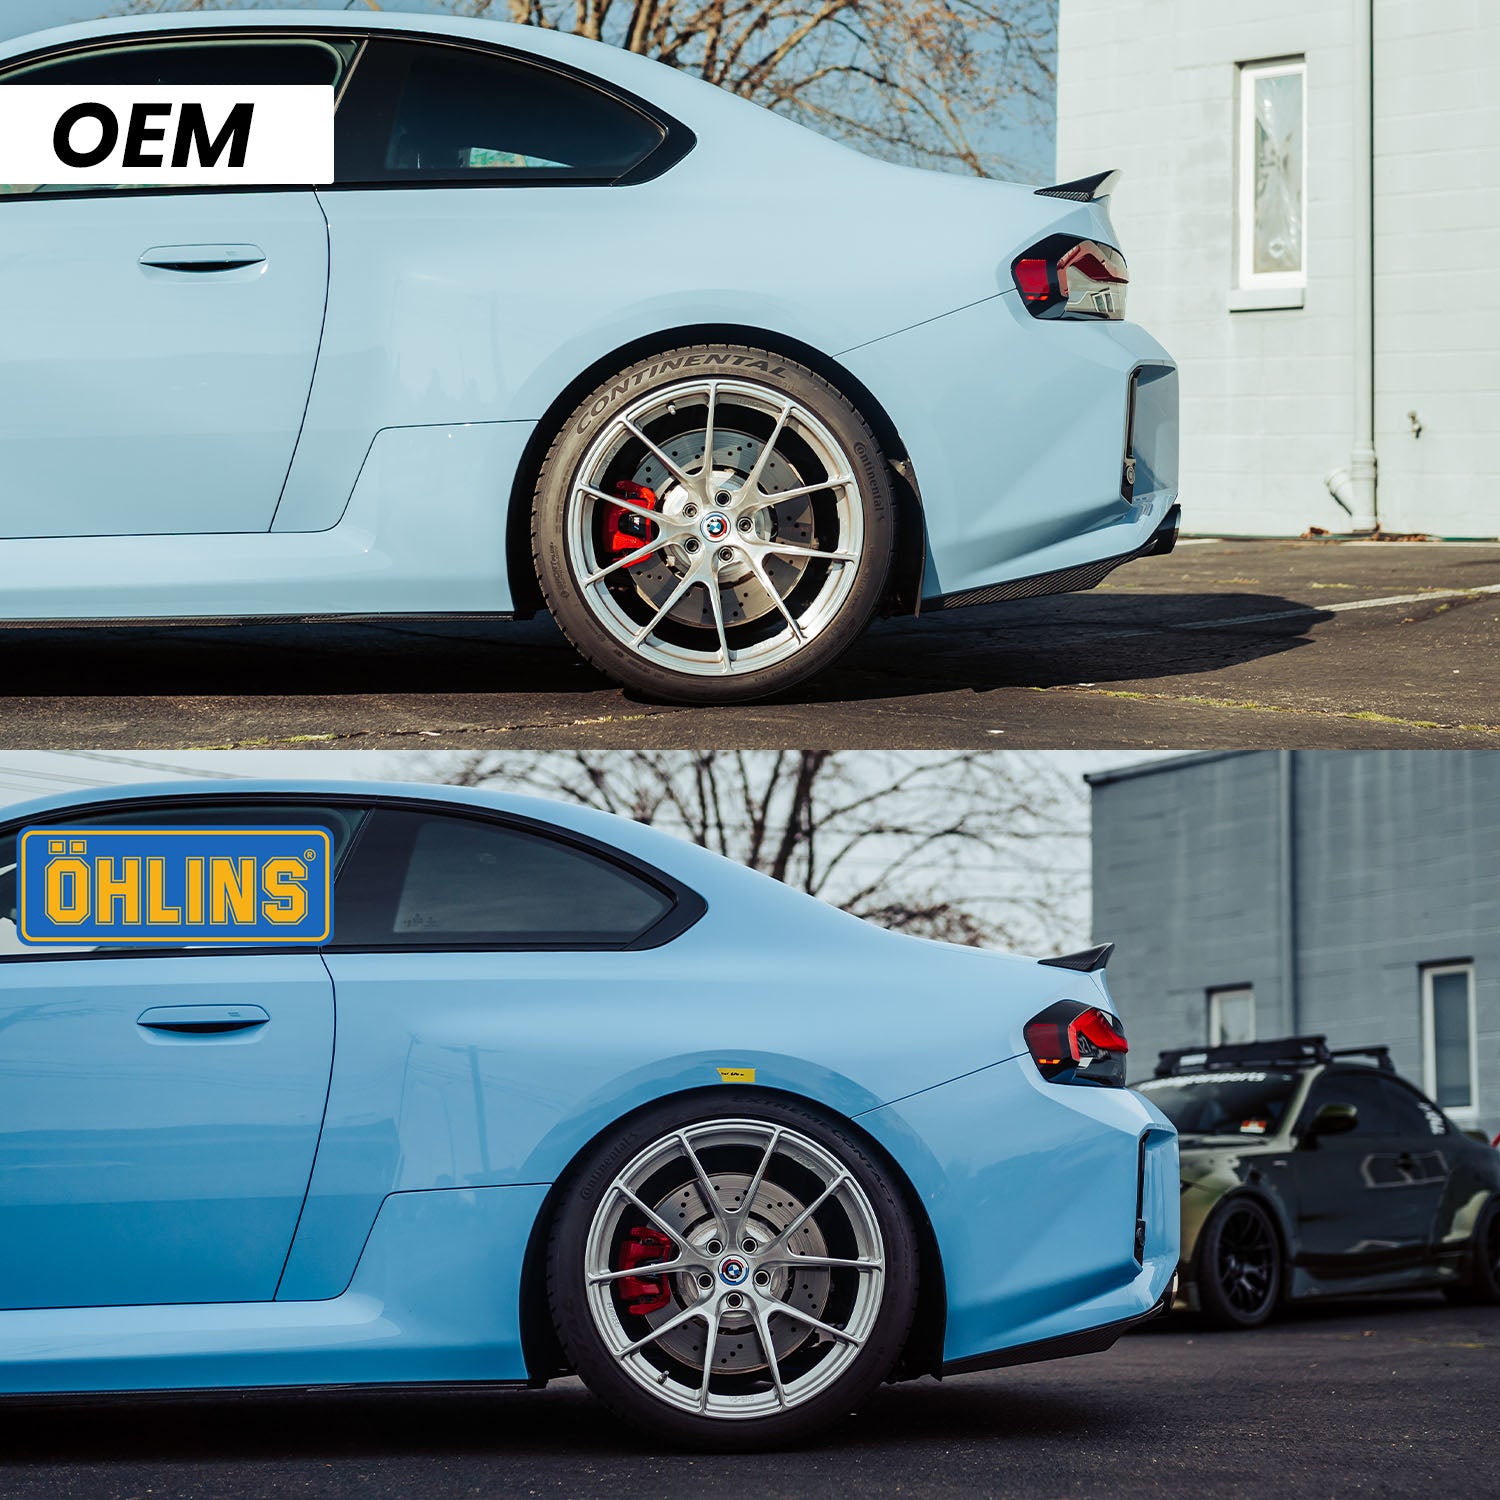 Öhlins Road & Track Coilover Suspension For BMW G87 M2, G80 M3 & G82 M4 Before & After